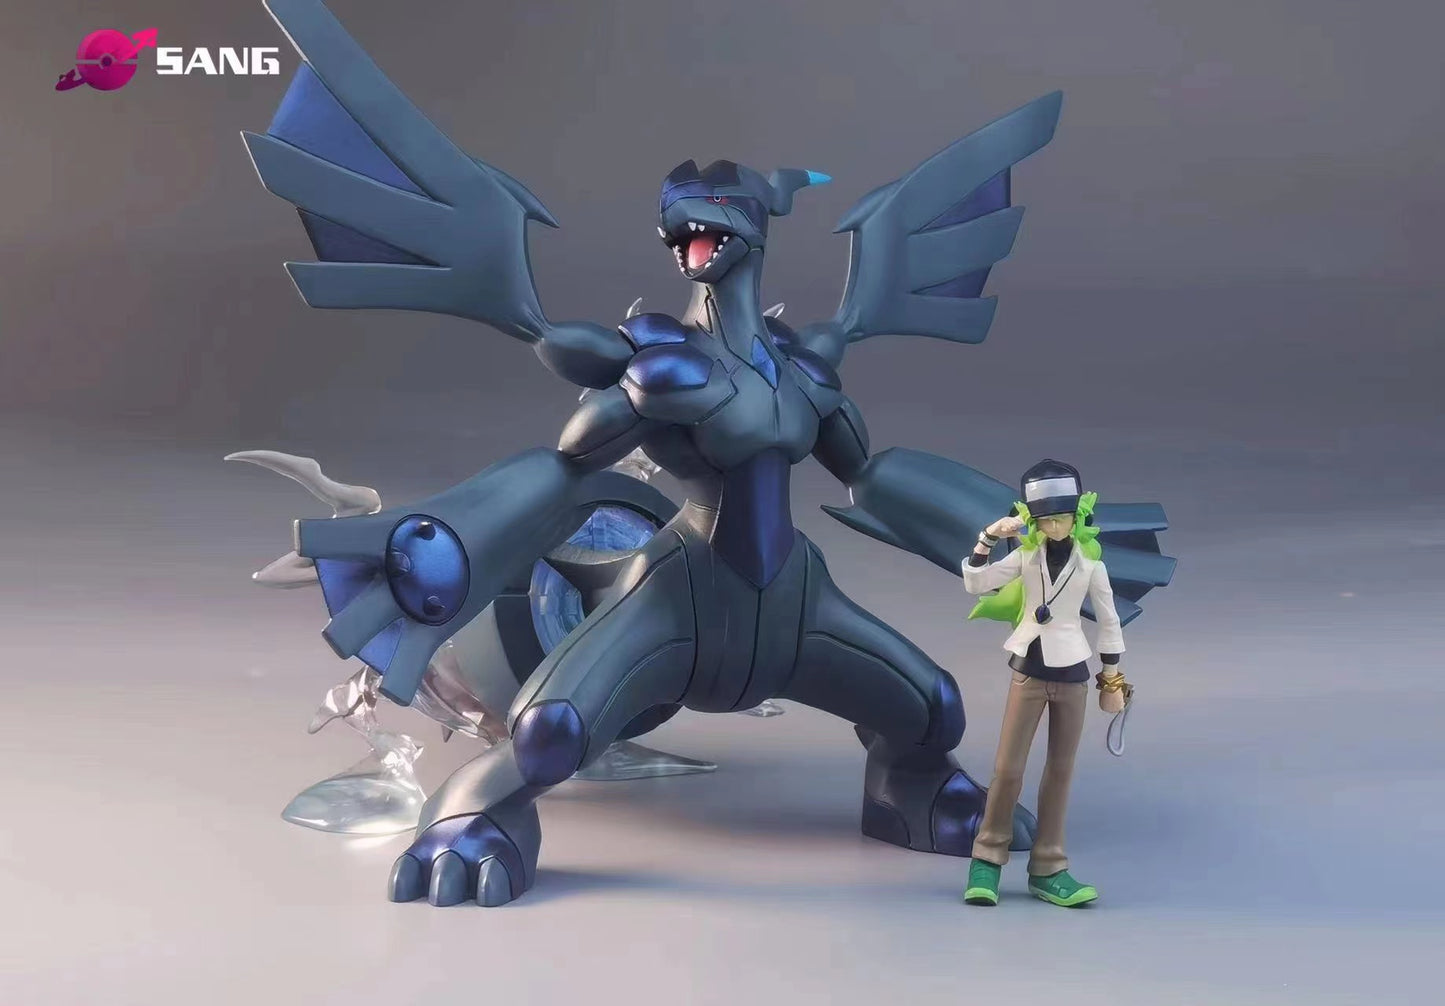 〖Sold Out〗Pokemon Scale World N 1:20 - SANG Studio